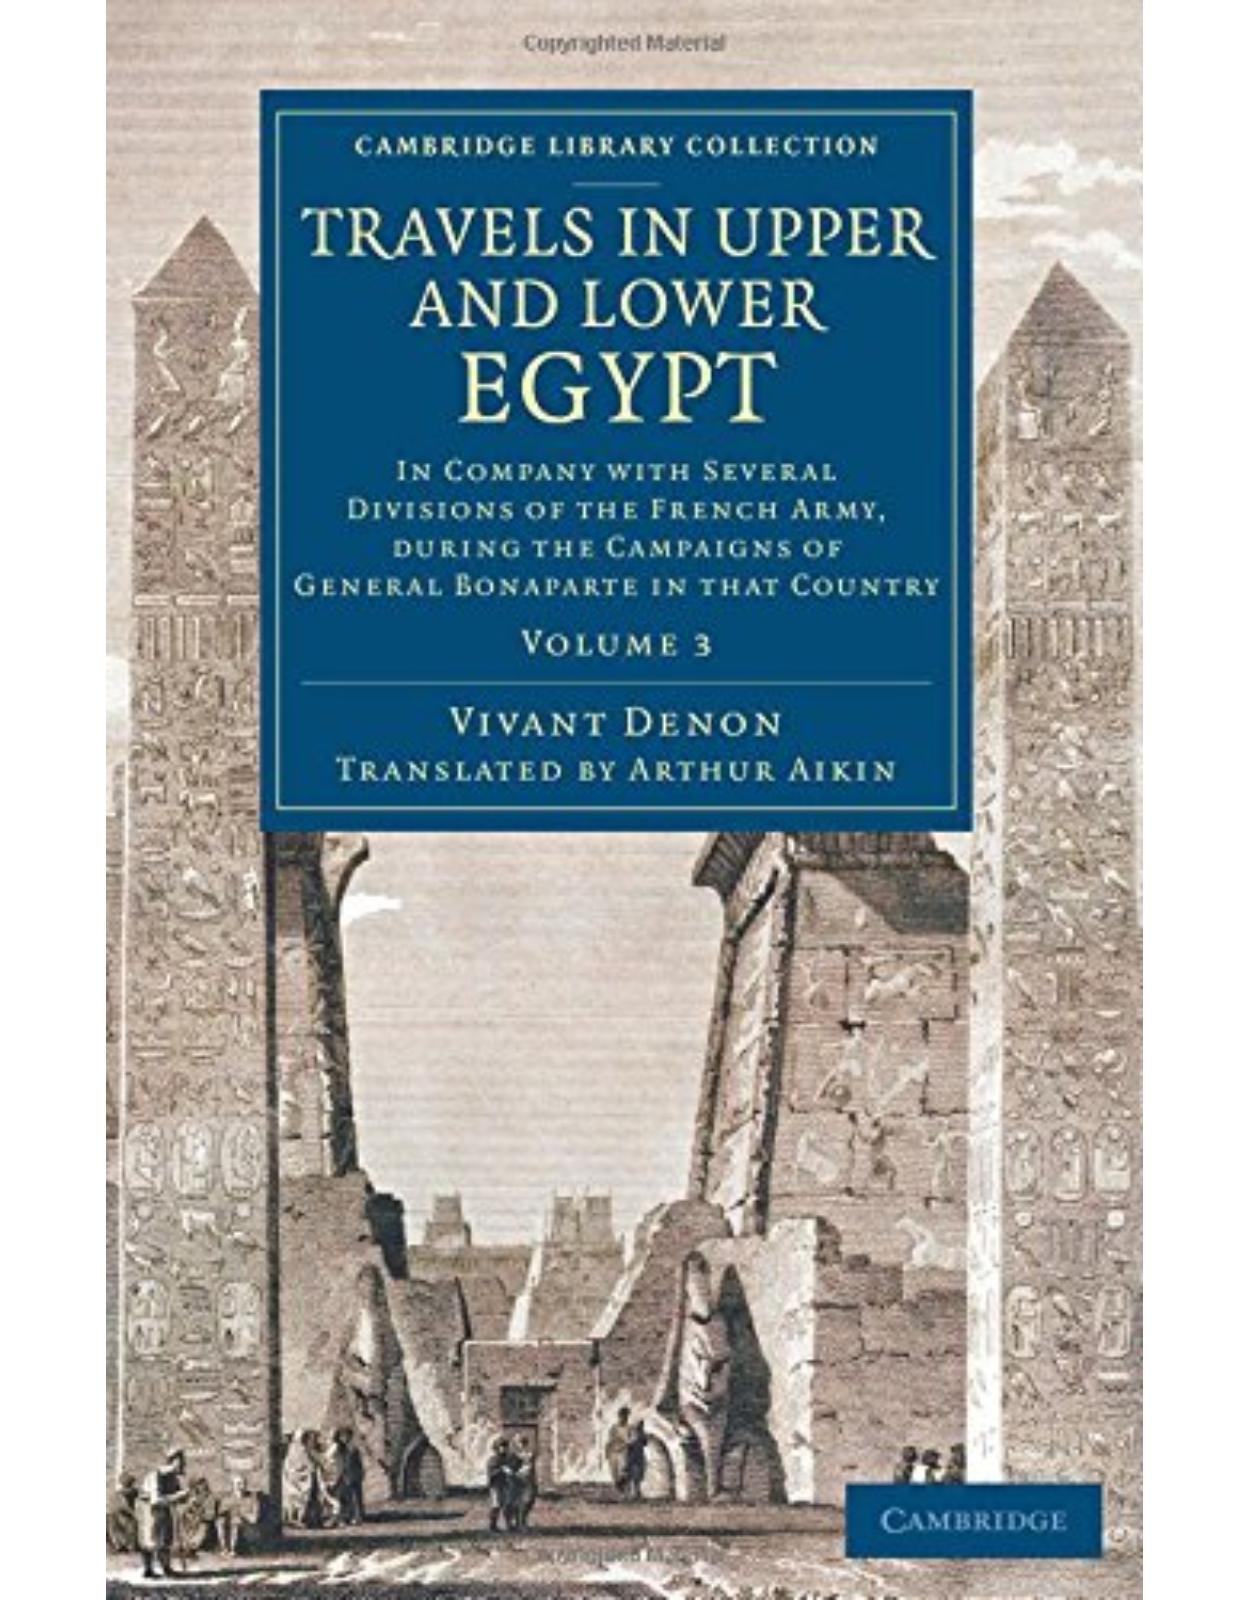 Travels in Upper and Lower Egypt: In Company with Several Divisions of the French Army, during the Campaigns of General Bonaparte in that Country: Volume 3 (Cambridge Library Collection - Egyptology)